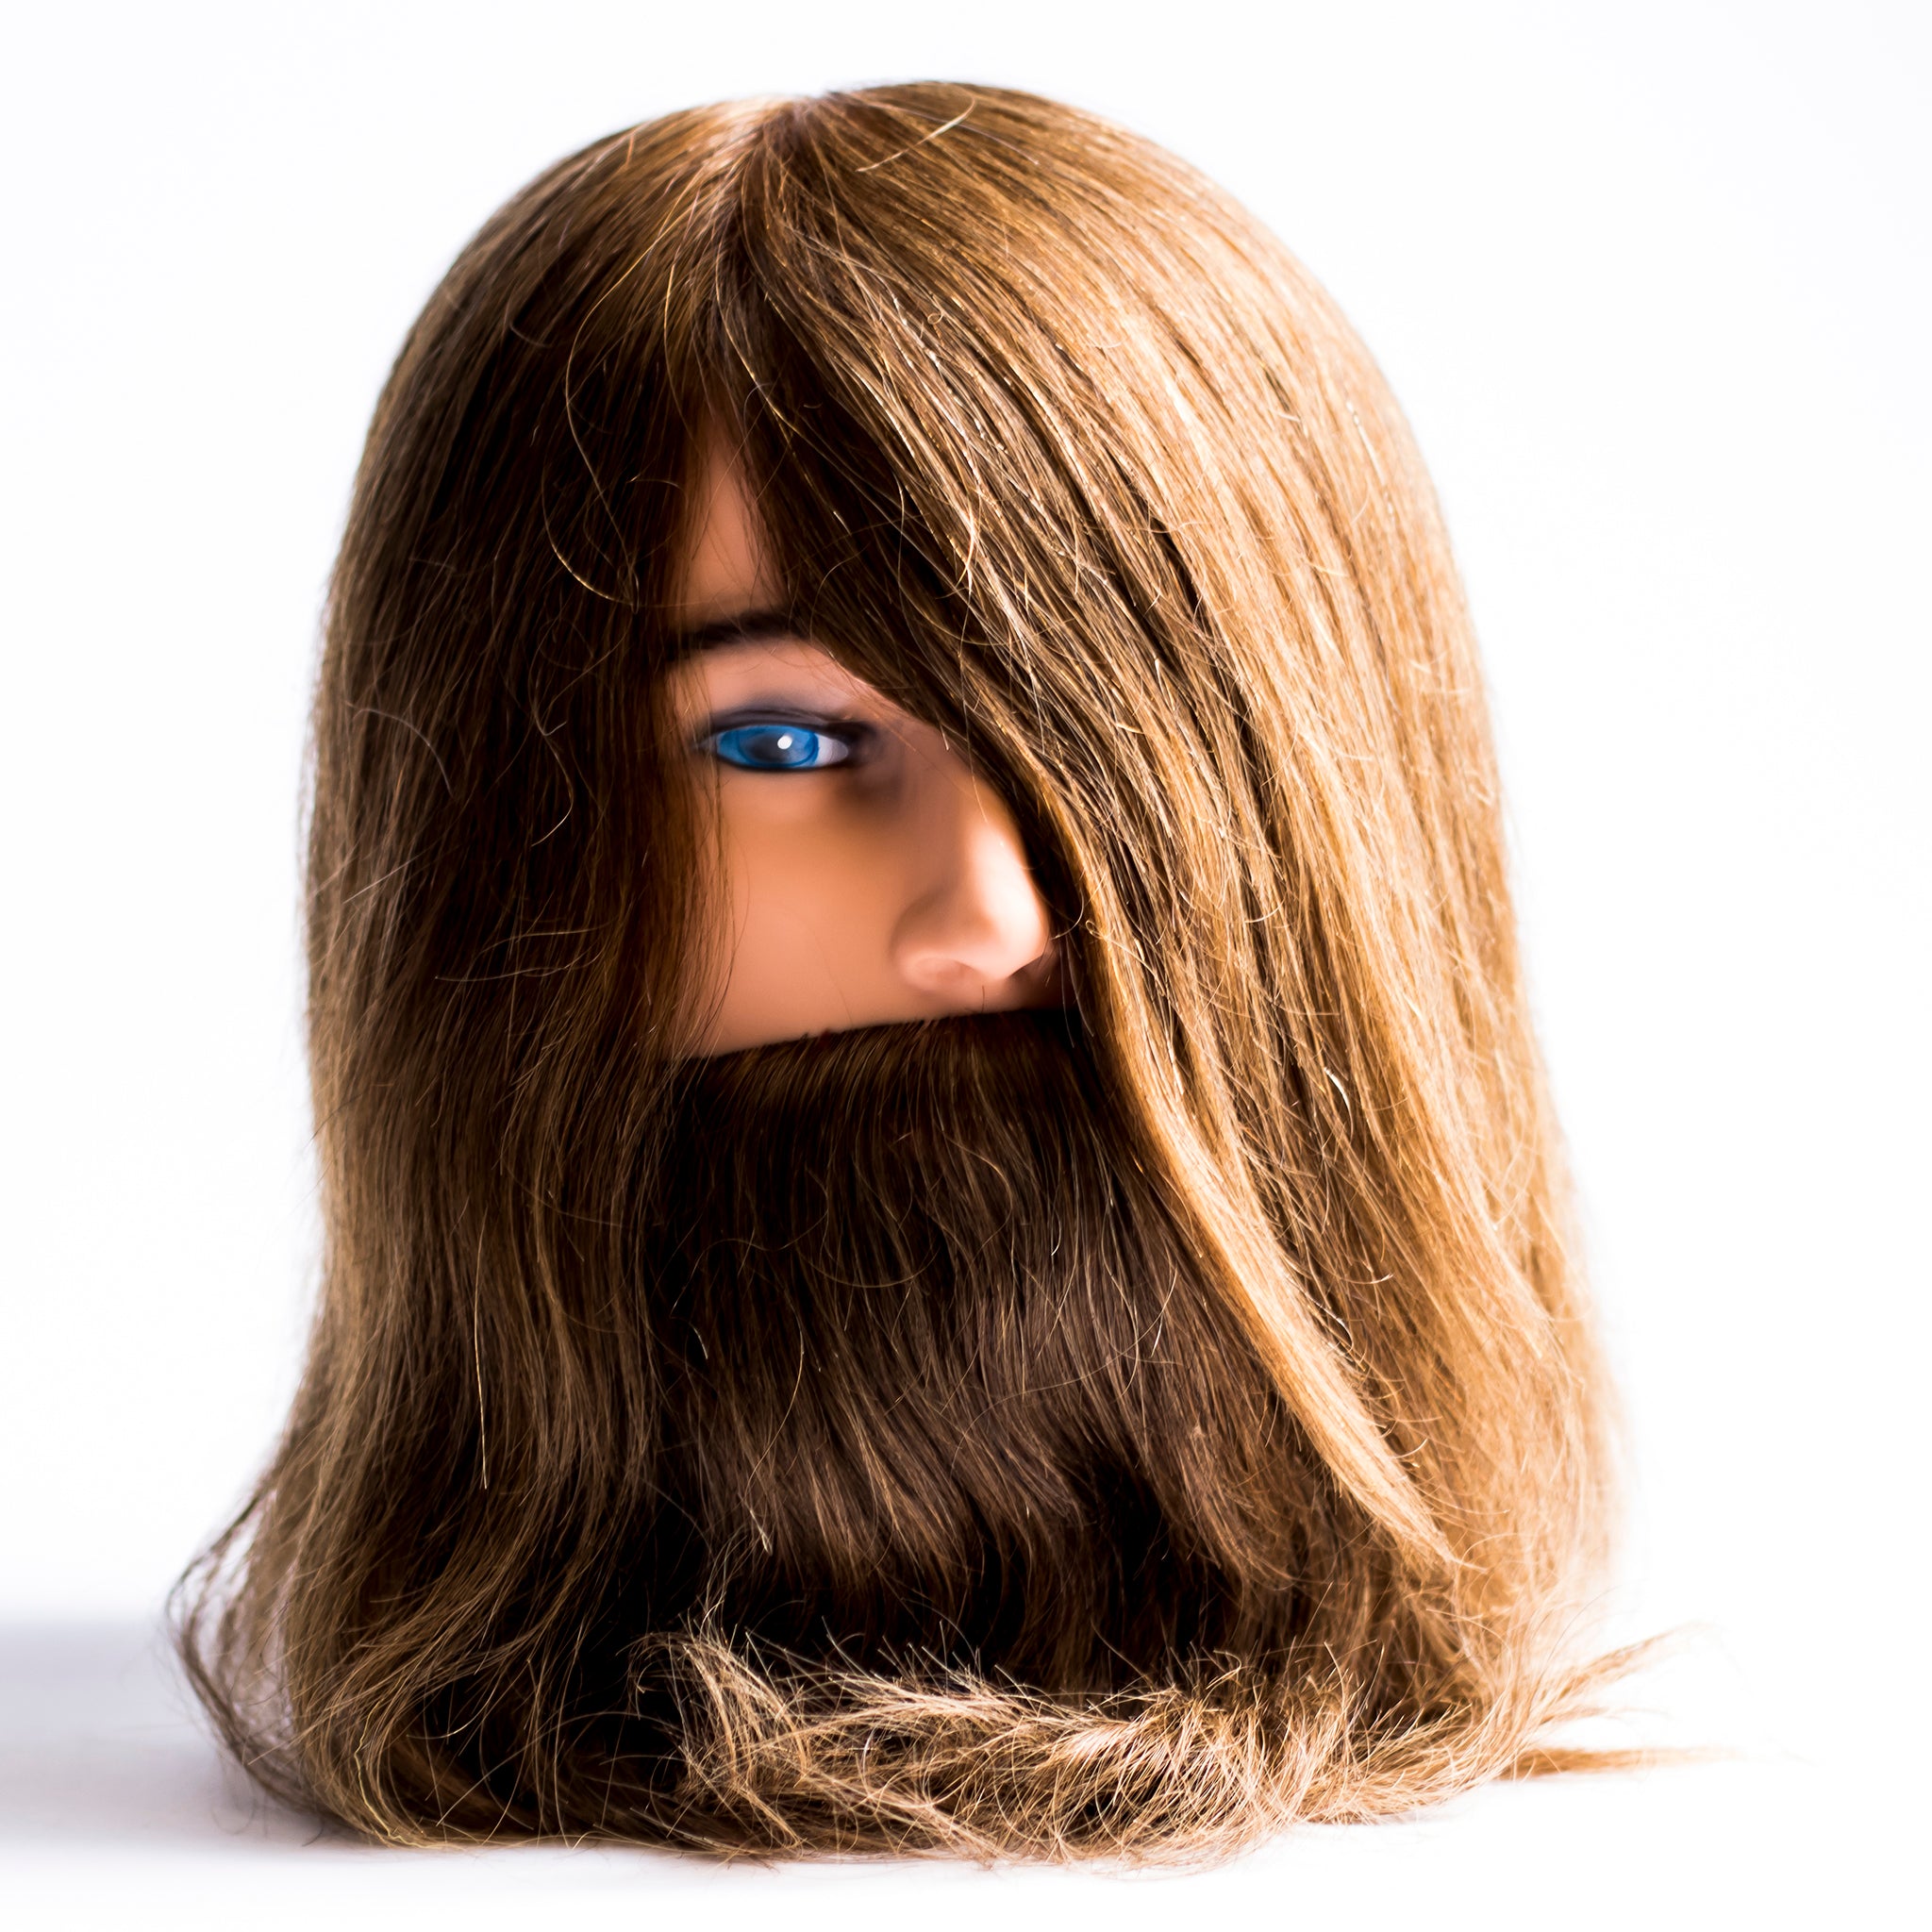 Bearded Mannequin - George - 73